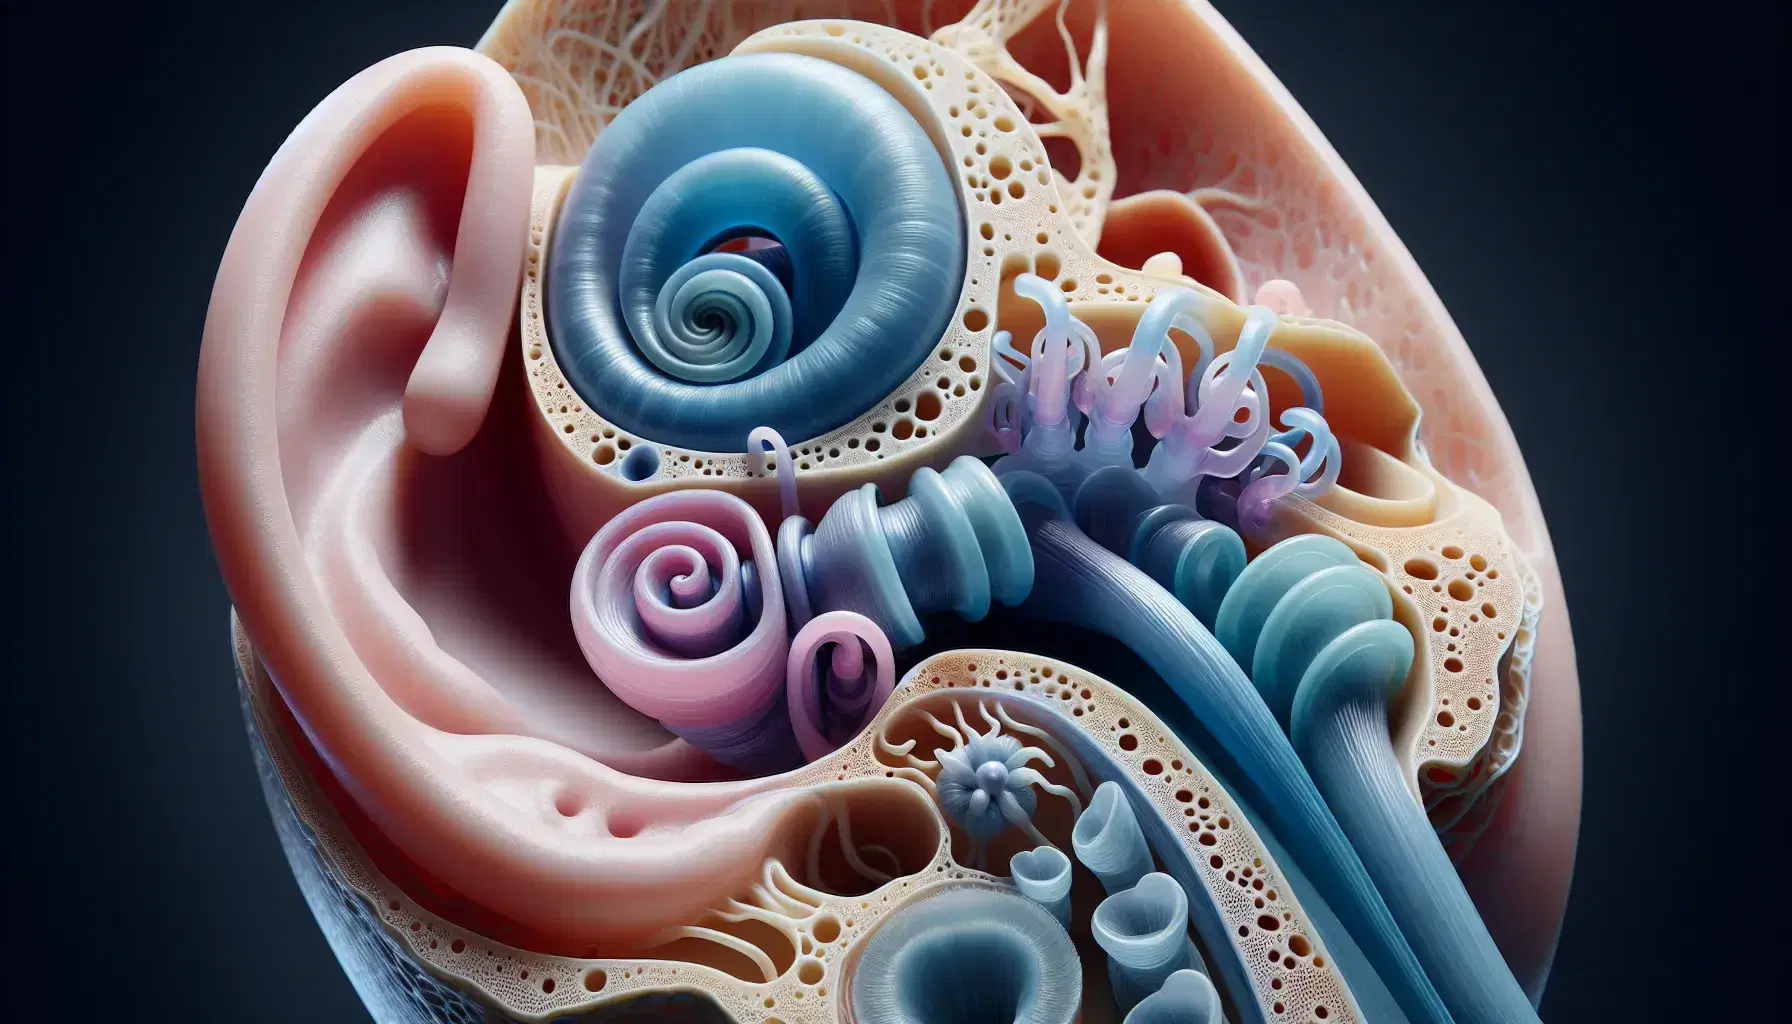 Detailed anatomical model of the human inner ear with blue semicircular canals, pink cochlea and white vestibular nerve.